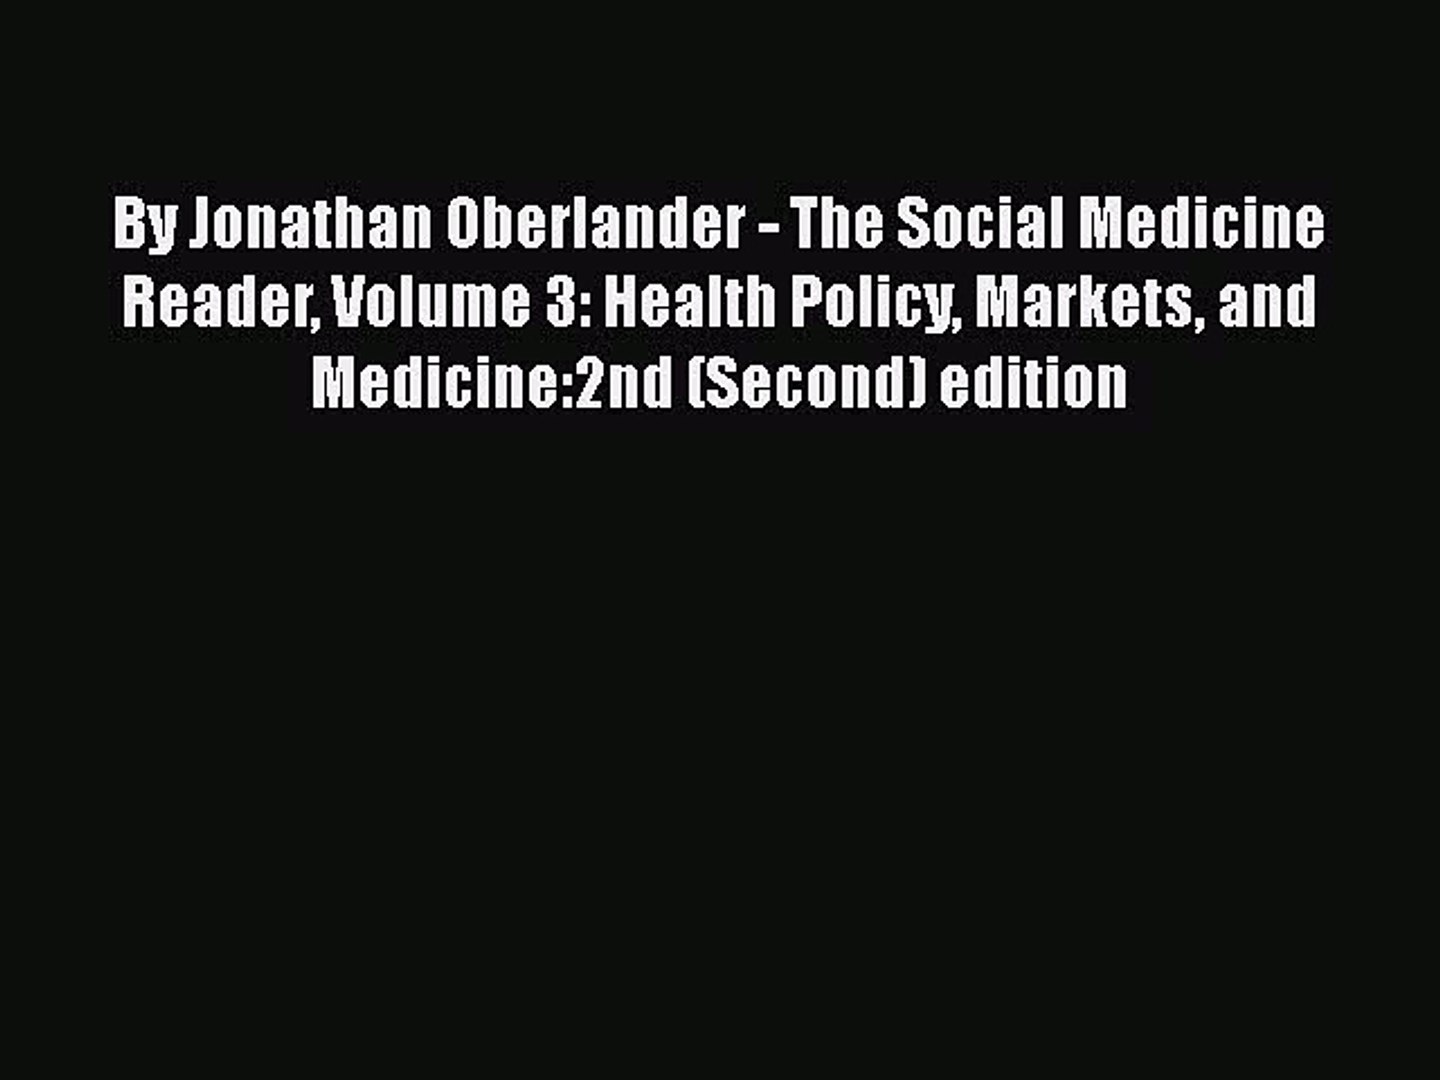 ⁣By Jonathan Oberlander - The Social Medicine Reader Volume 3: Health Policy Markets and Medicine:2nd